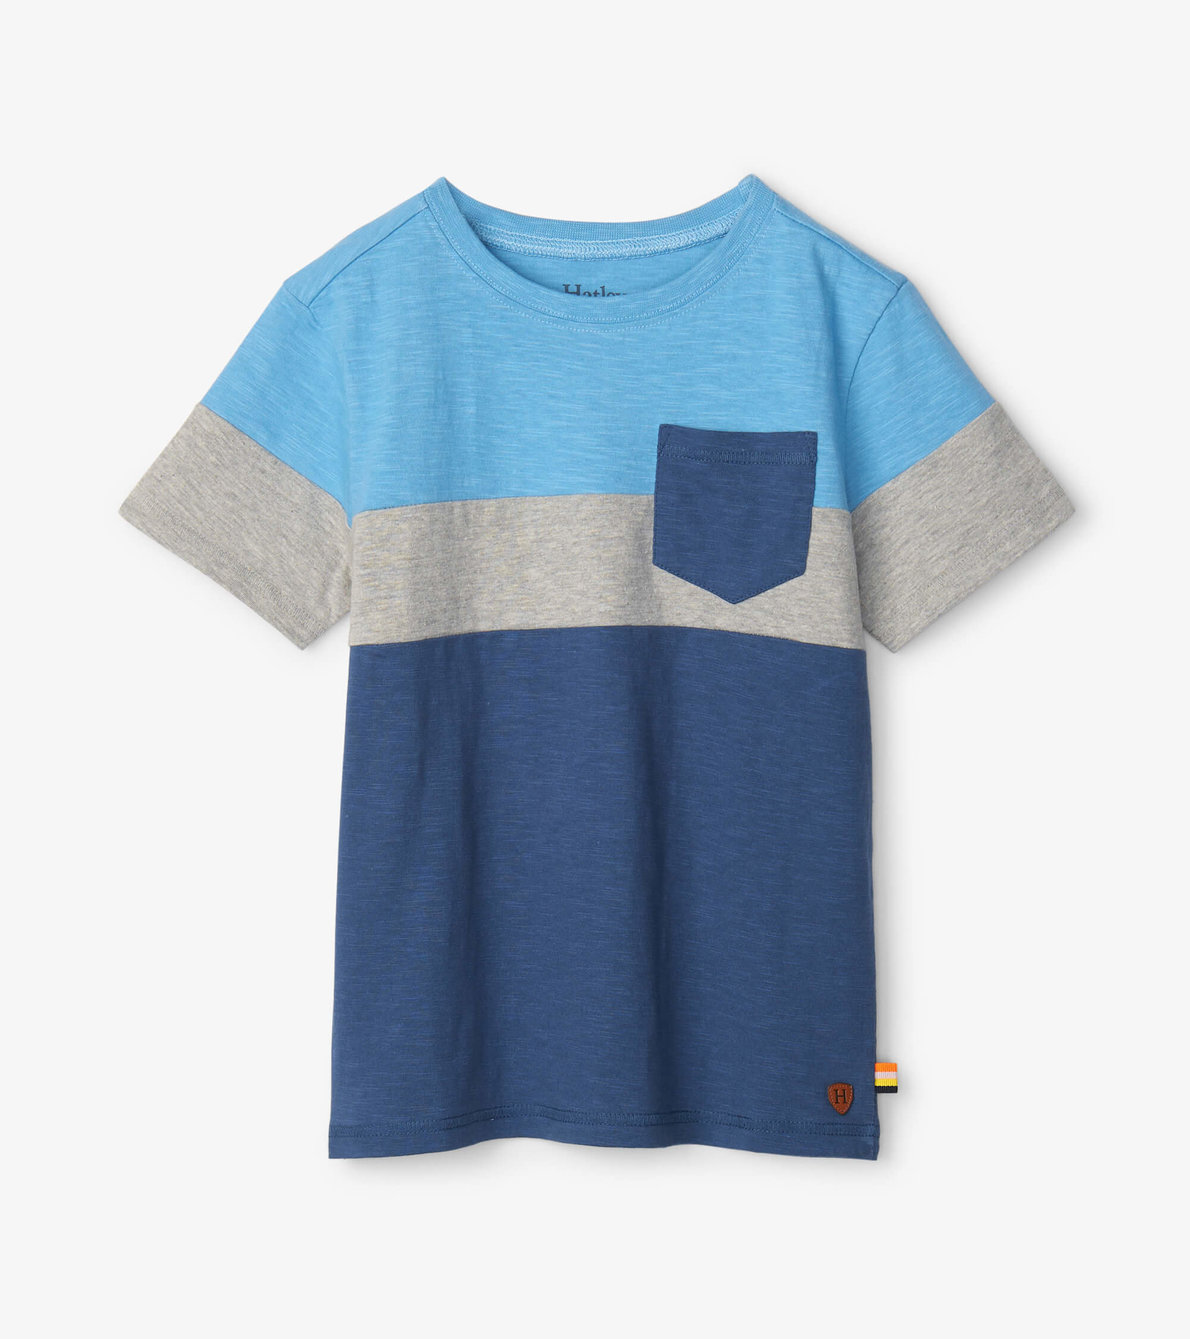 View larger image of Blue Panel Pocket Tee